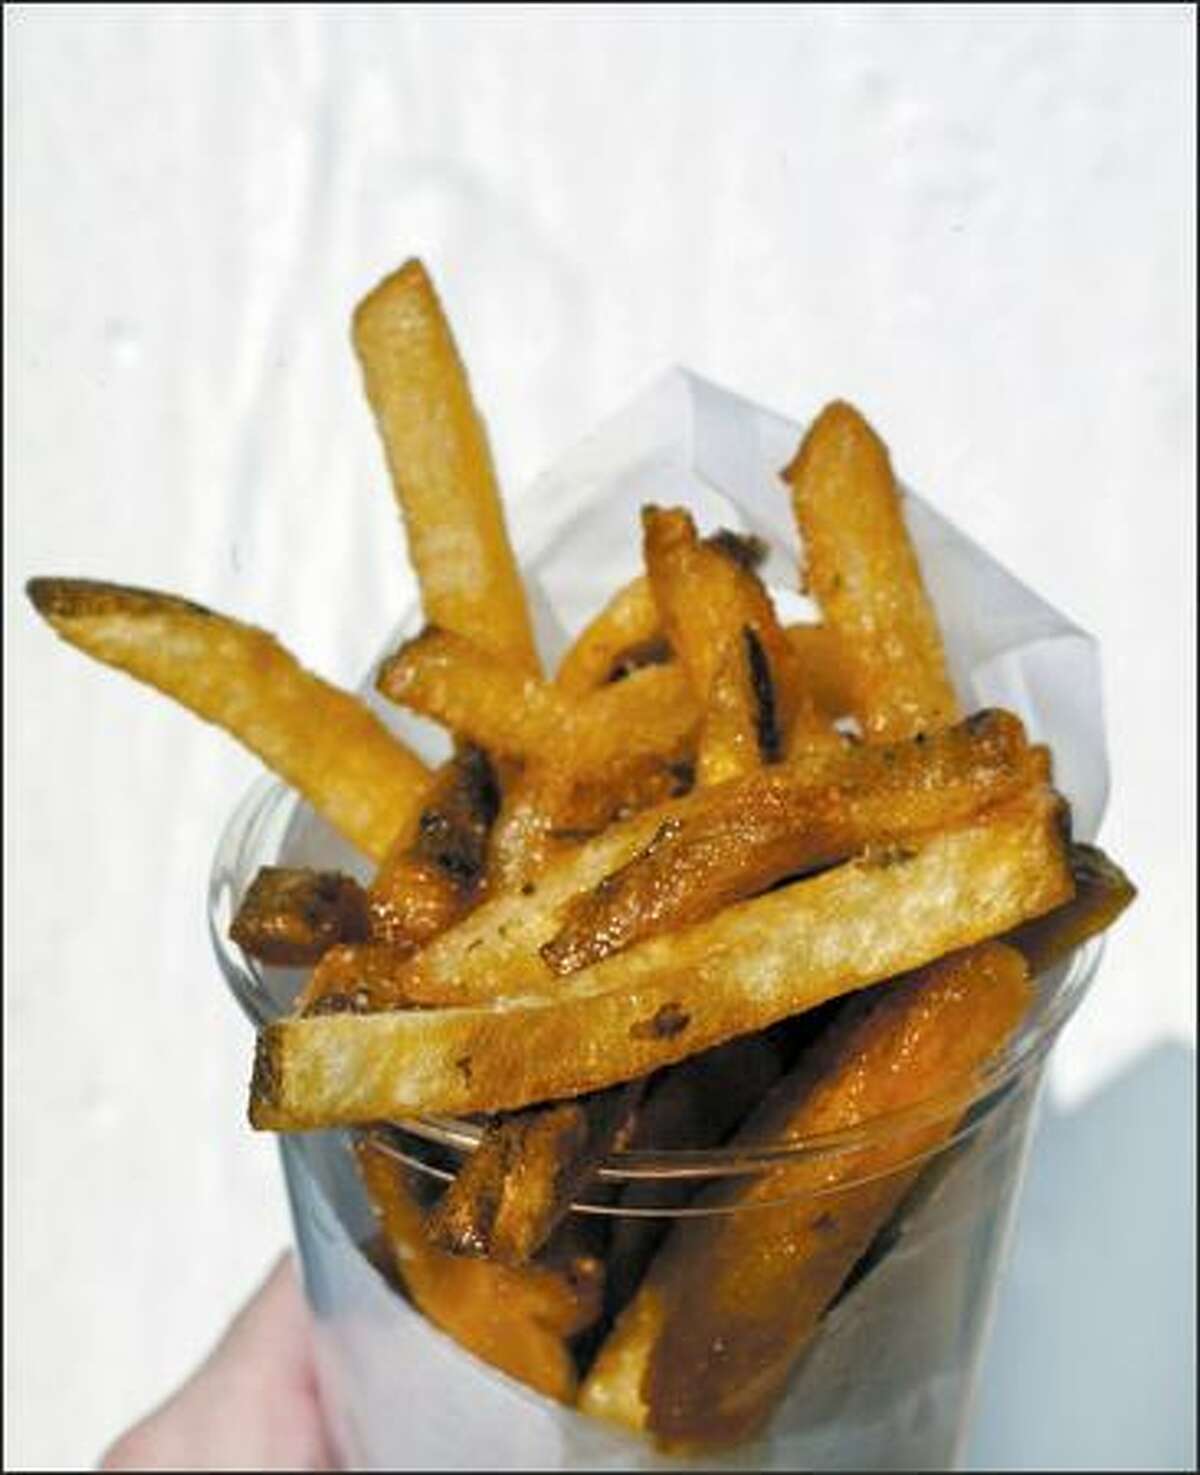 Some successful chefs are turning their talents to less formal side ventures, such as Monsoon chef Eric Banh's Baguette Box, where these truffle fries are served.